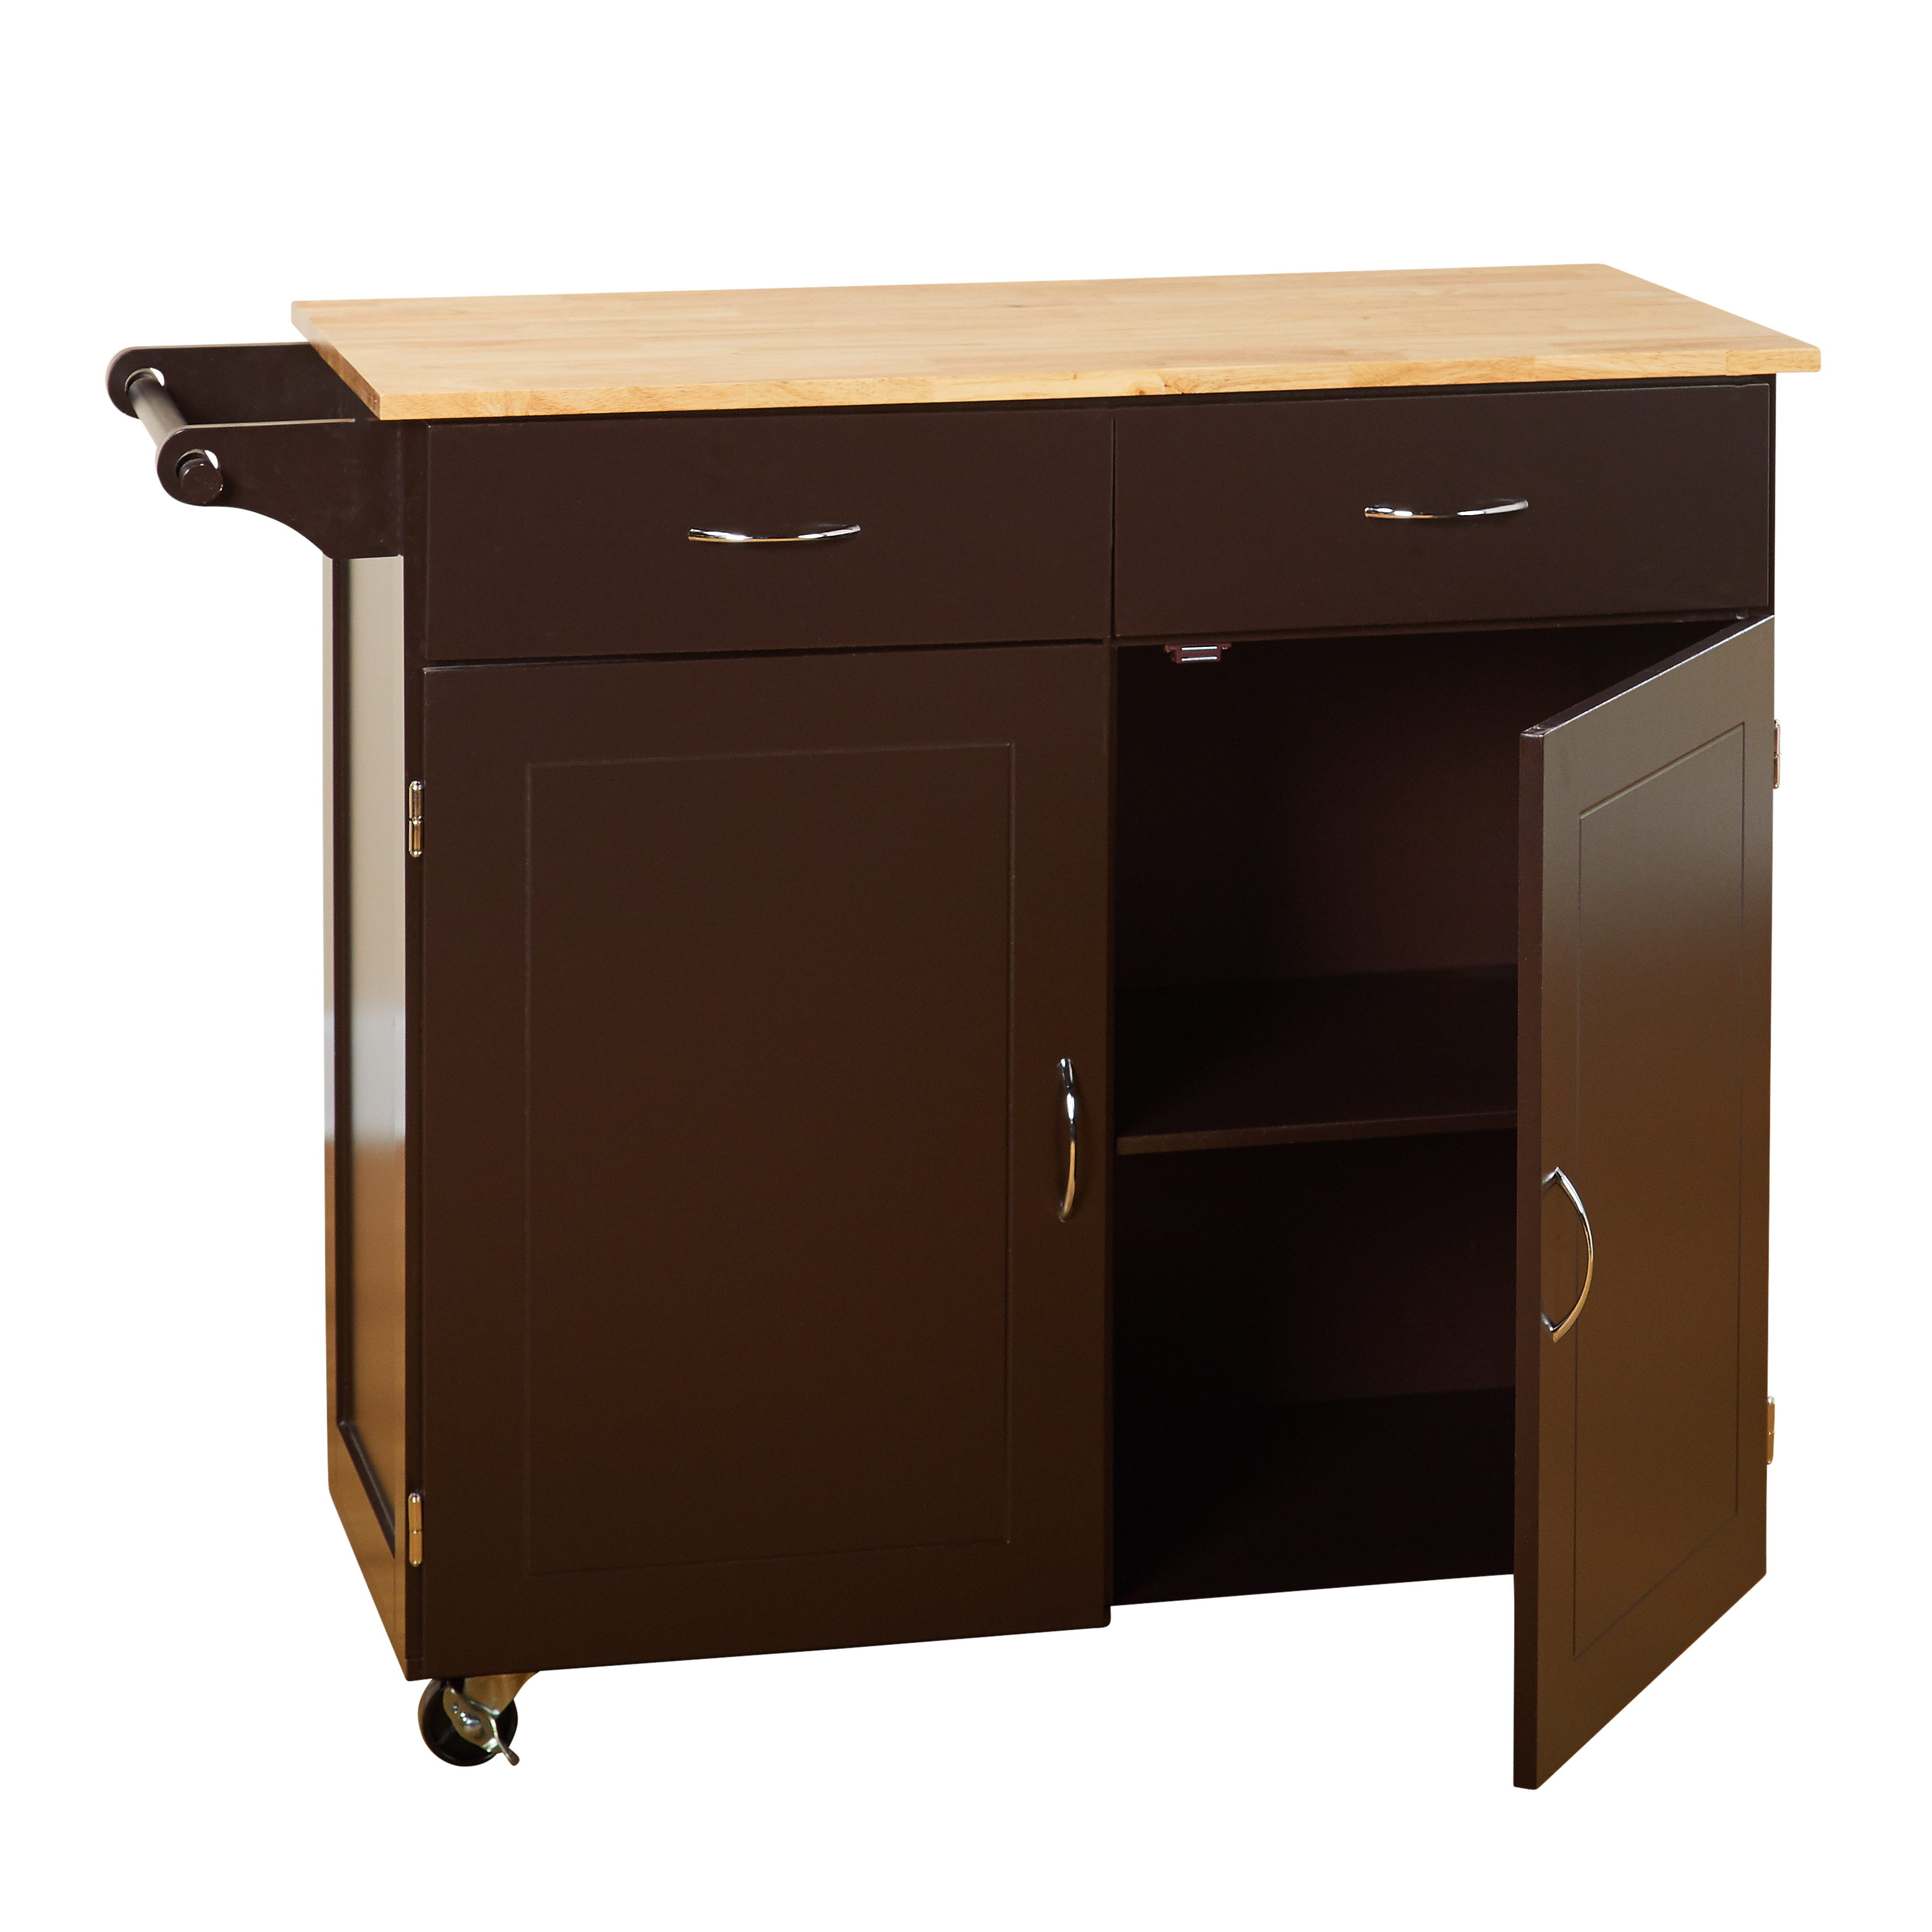 TMS Large Kitchen Cart with Rubber wood Top, Espresso - image 5 of 5